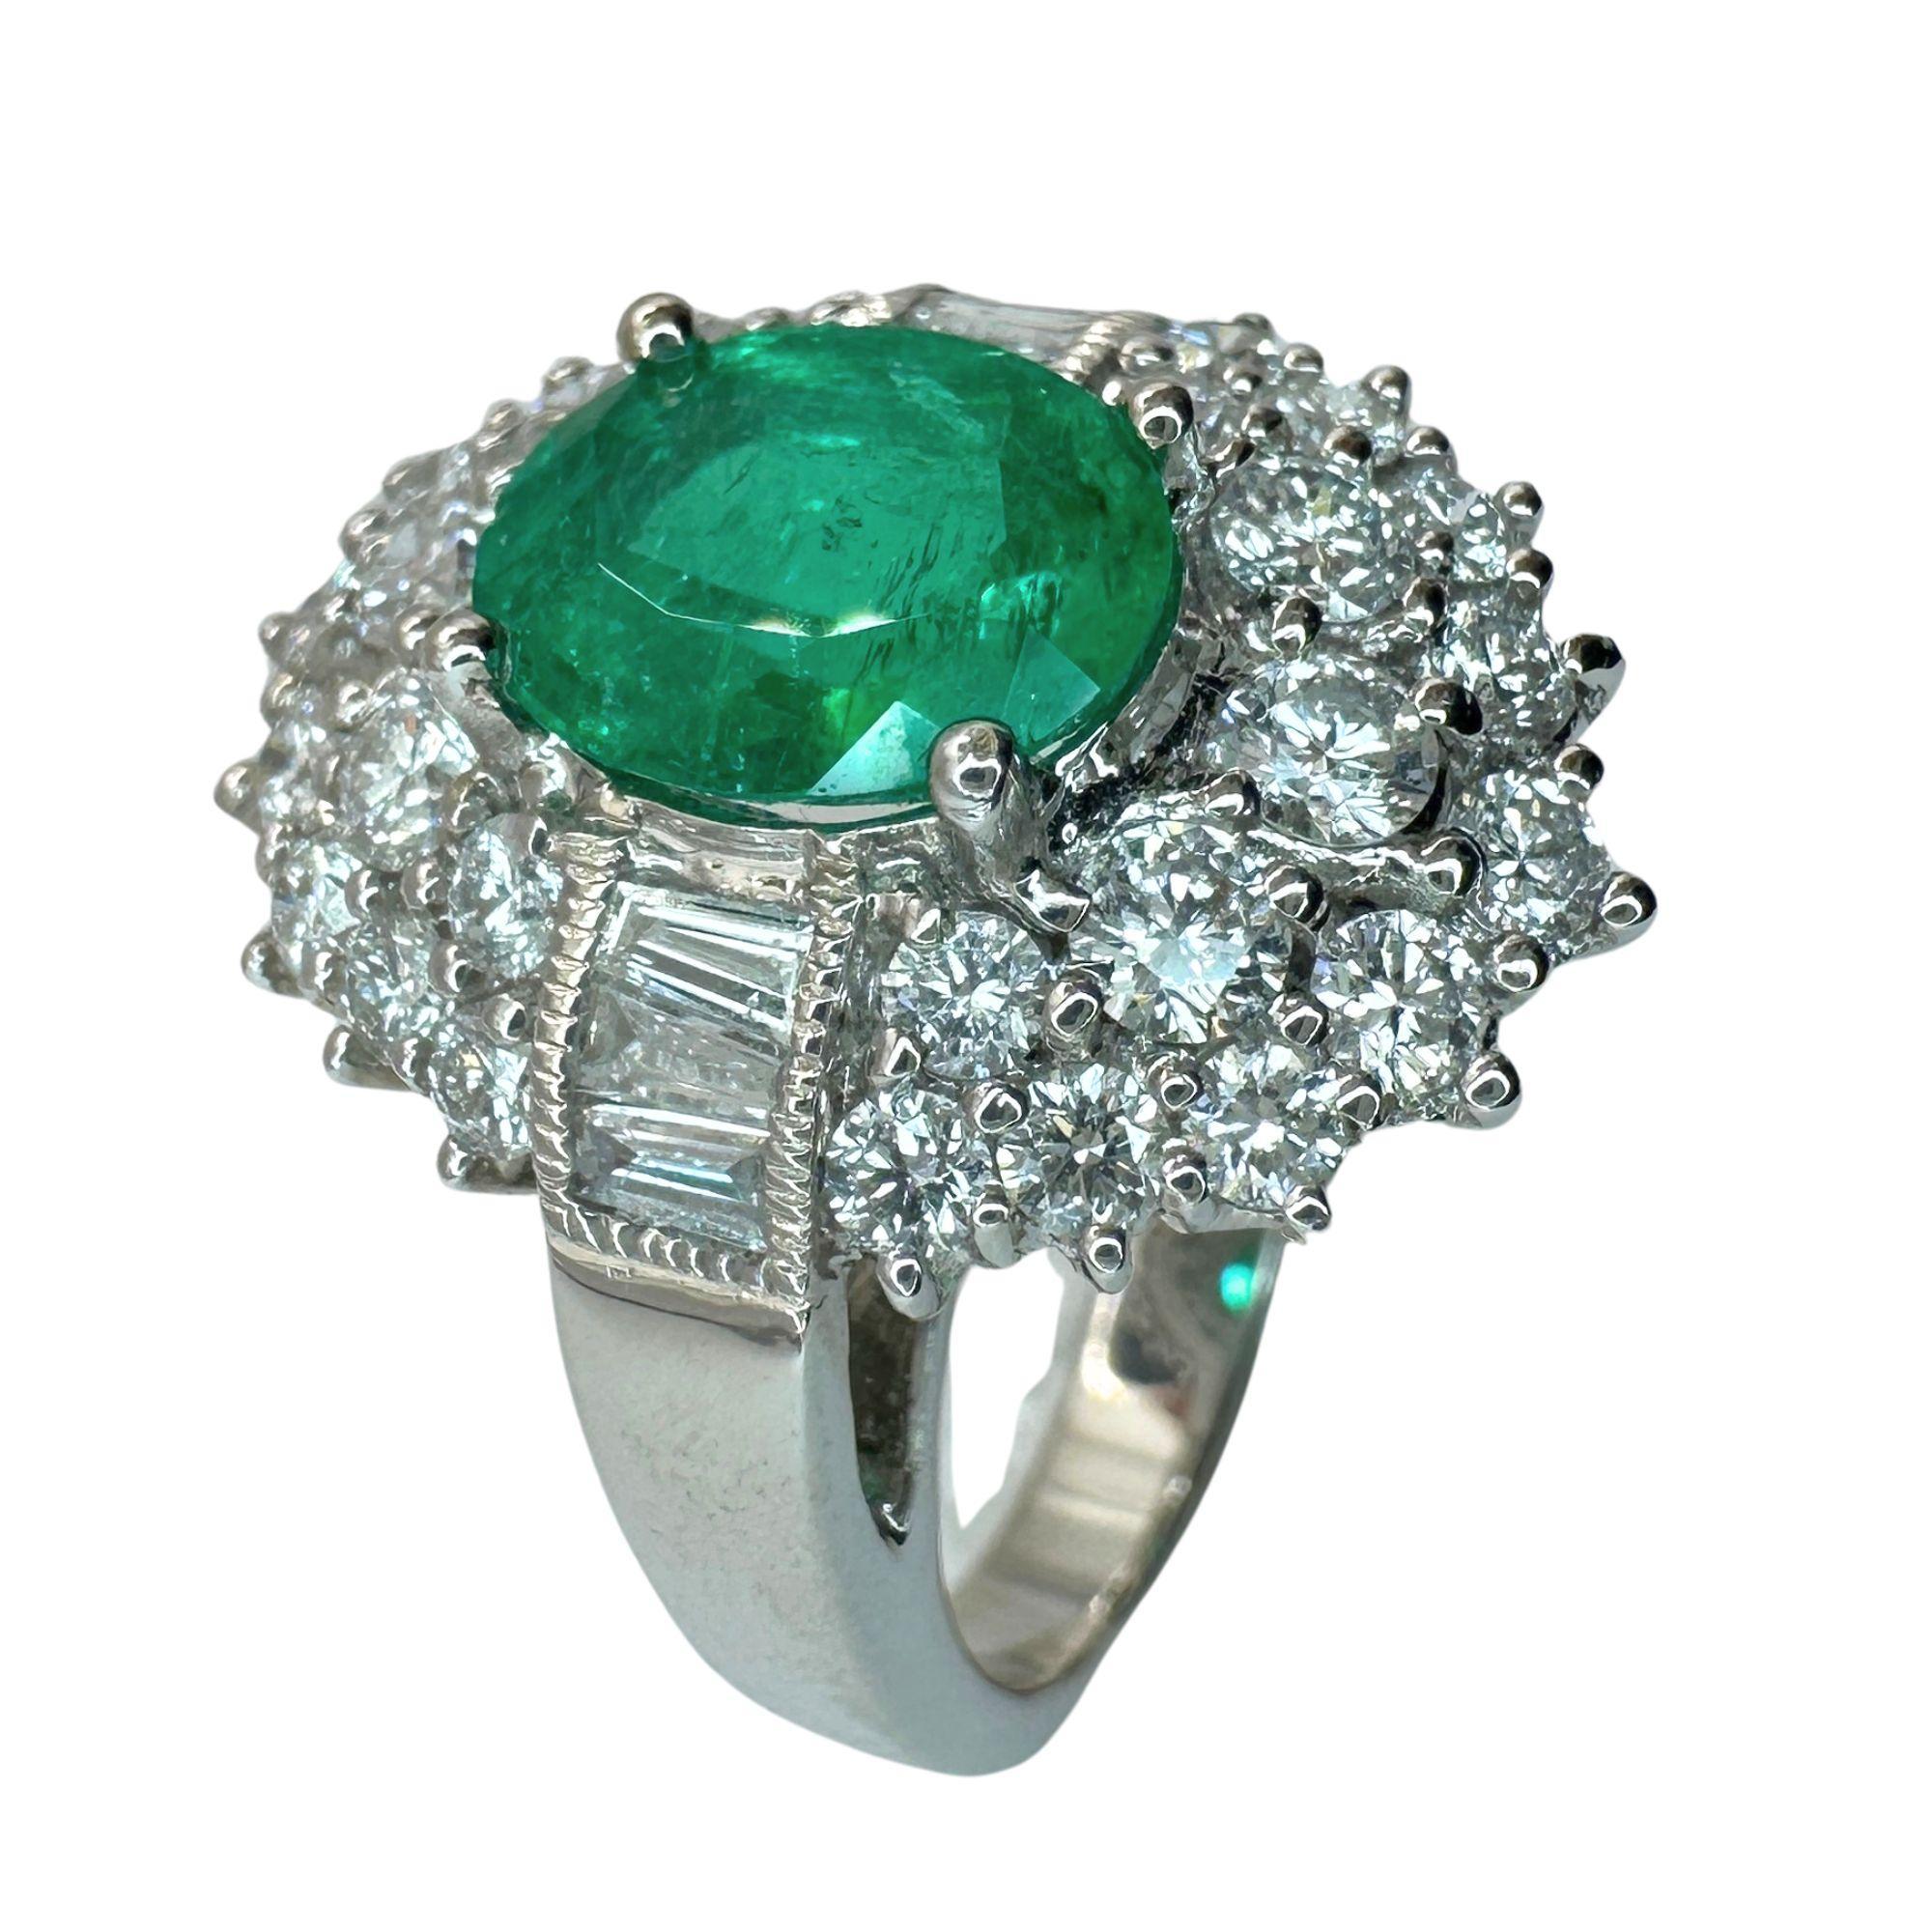 Indulge in the ultimate luxury with our 18k Diamond and Emerald Ring. Crafted from white gold and adorned with 1.55 carats of sparkling diamonds and a stunning 1.71 carat emerald center, this ring exudes elegance and sophistication. With a ring size